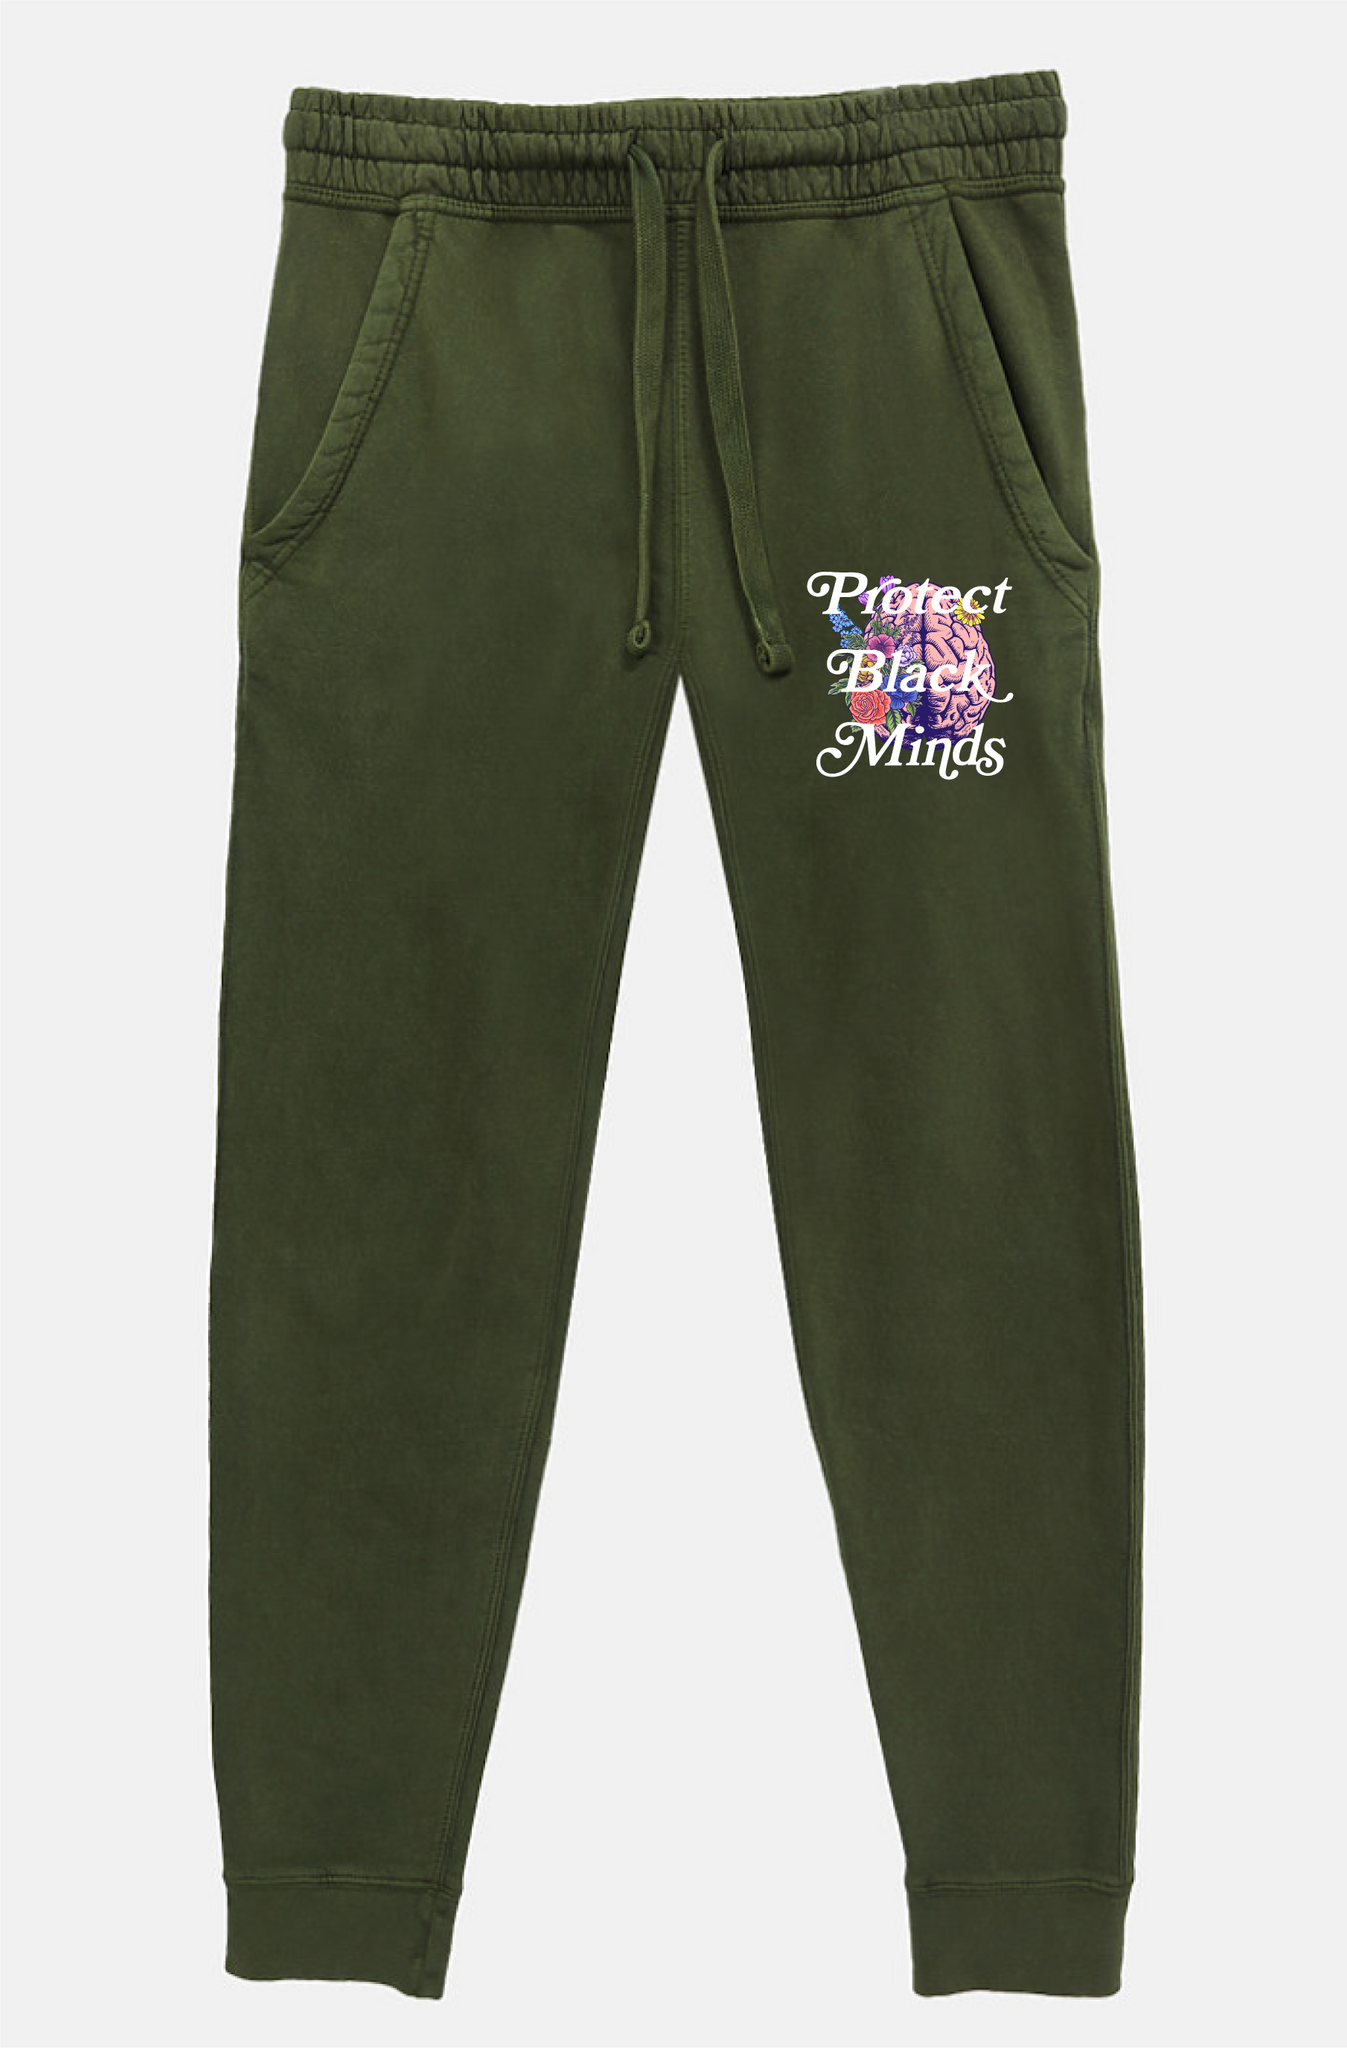 NEW- Protect Black Minds Cropped Sweatpants